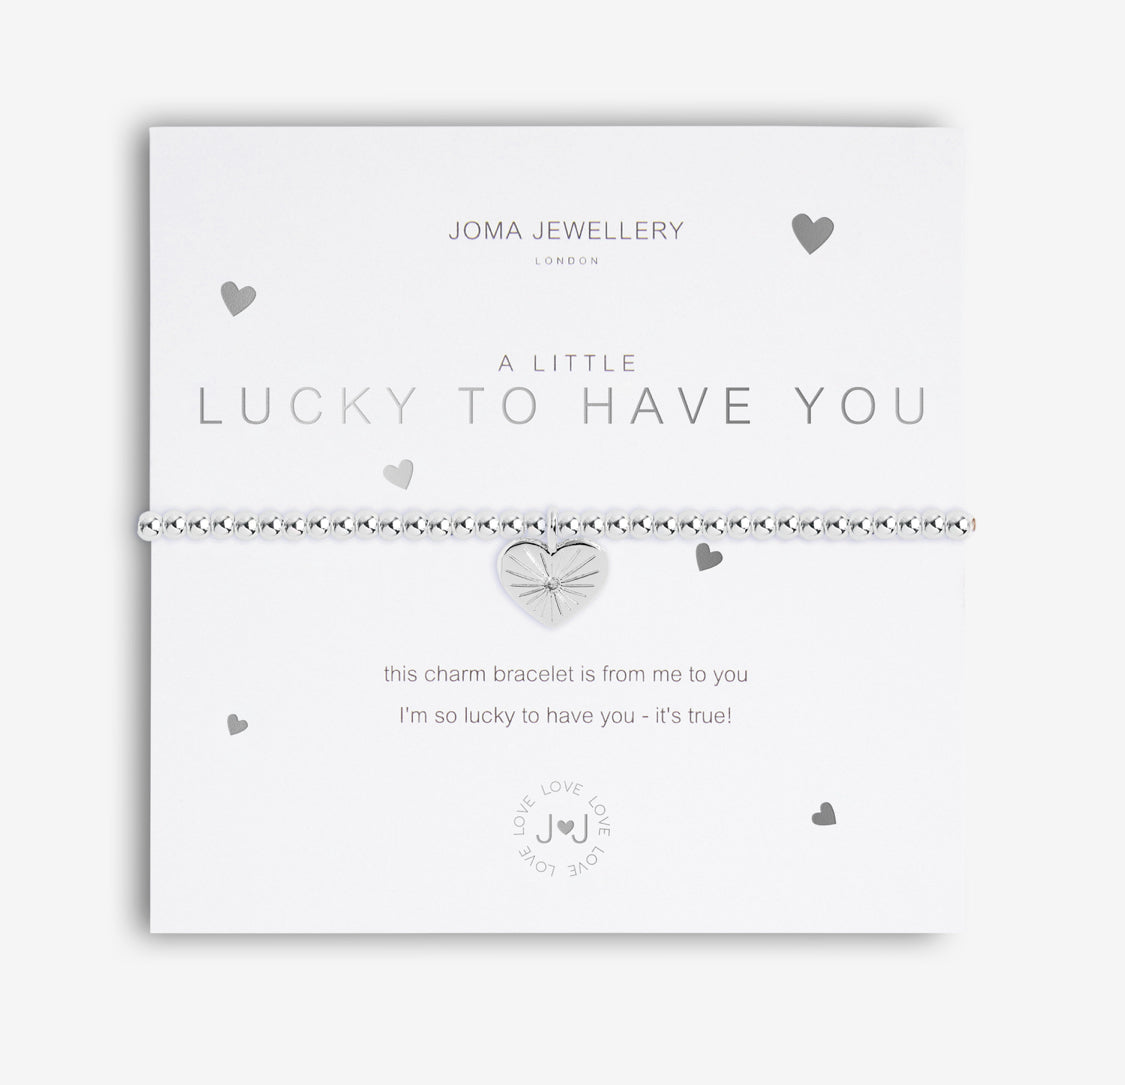 Joma Jewellery- A Little Lucky To Have You Bracelet